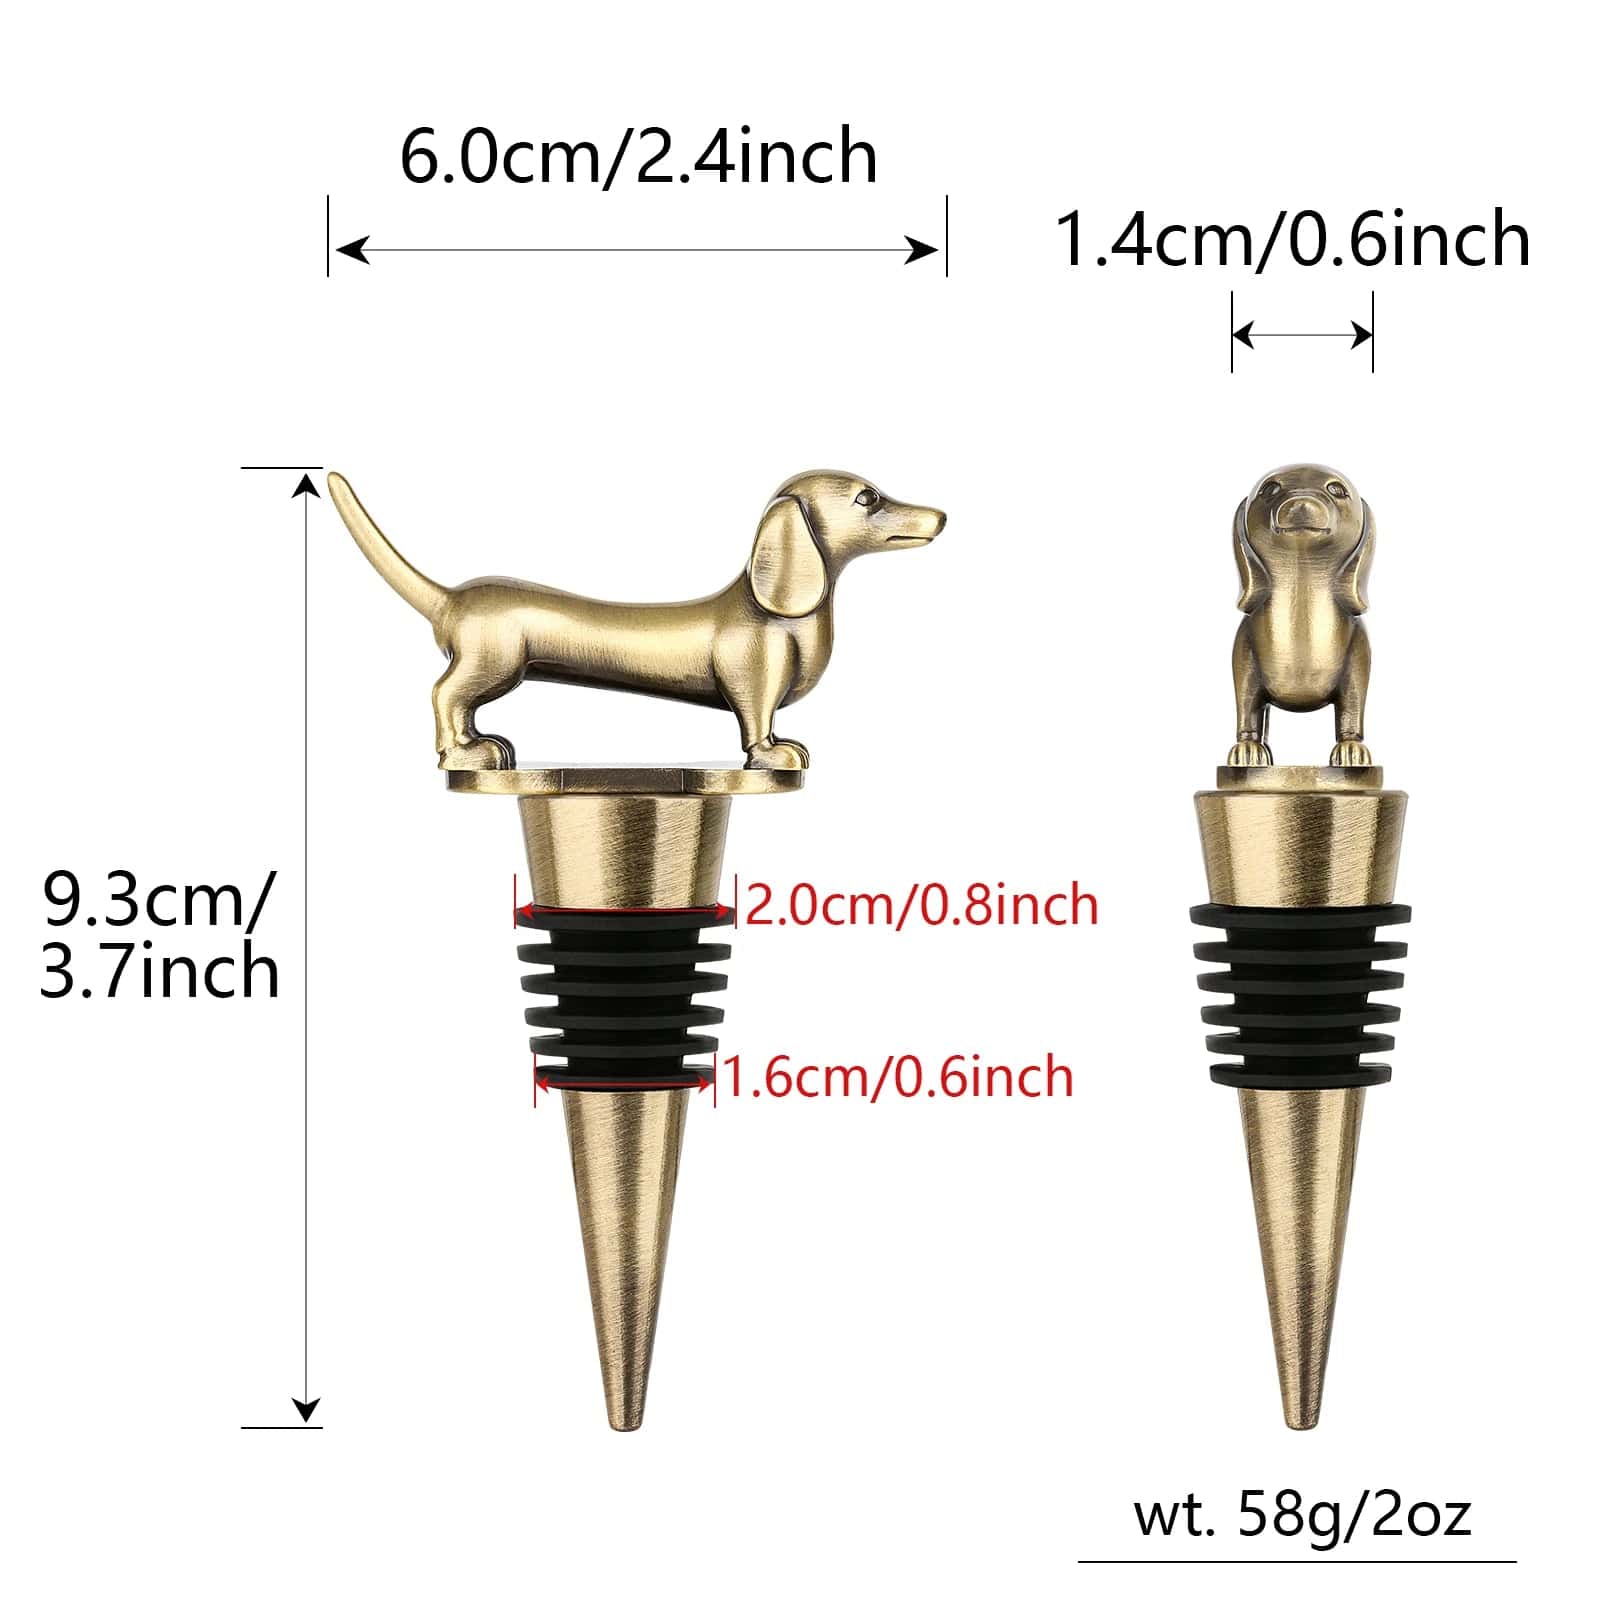 Exclusive Dachshund Bottle Stopper The Doxie World